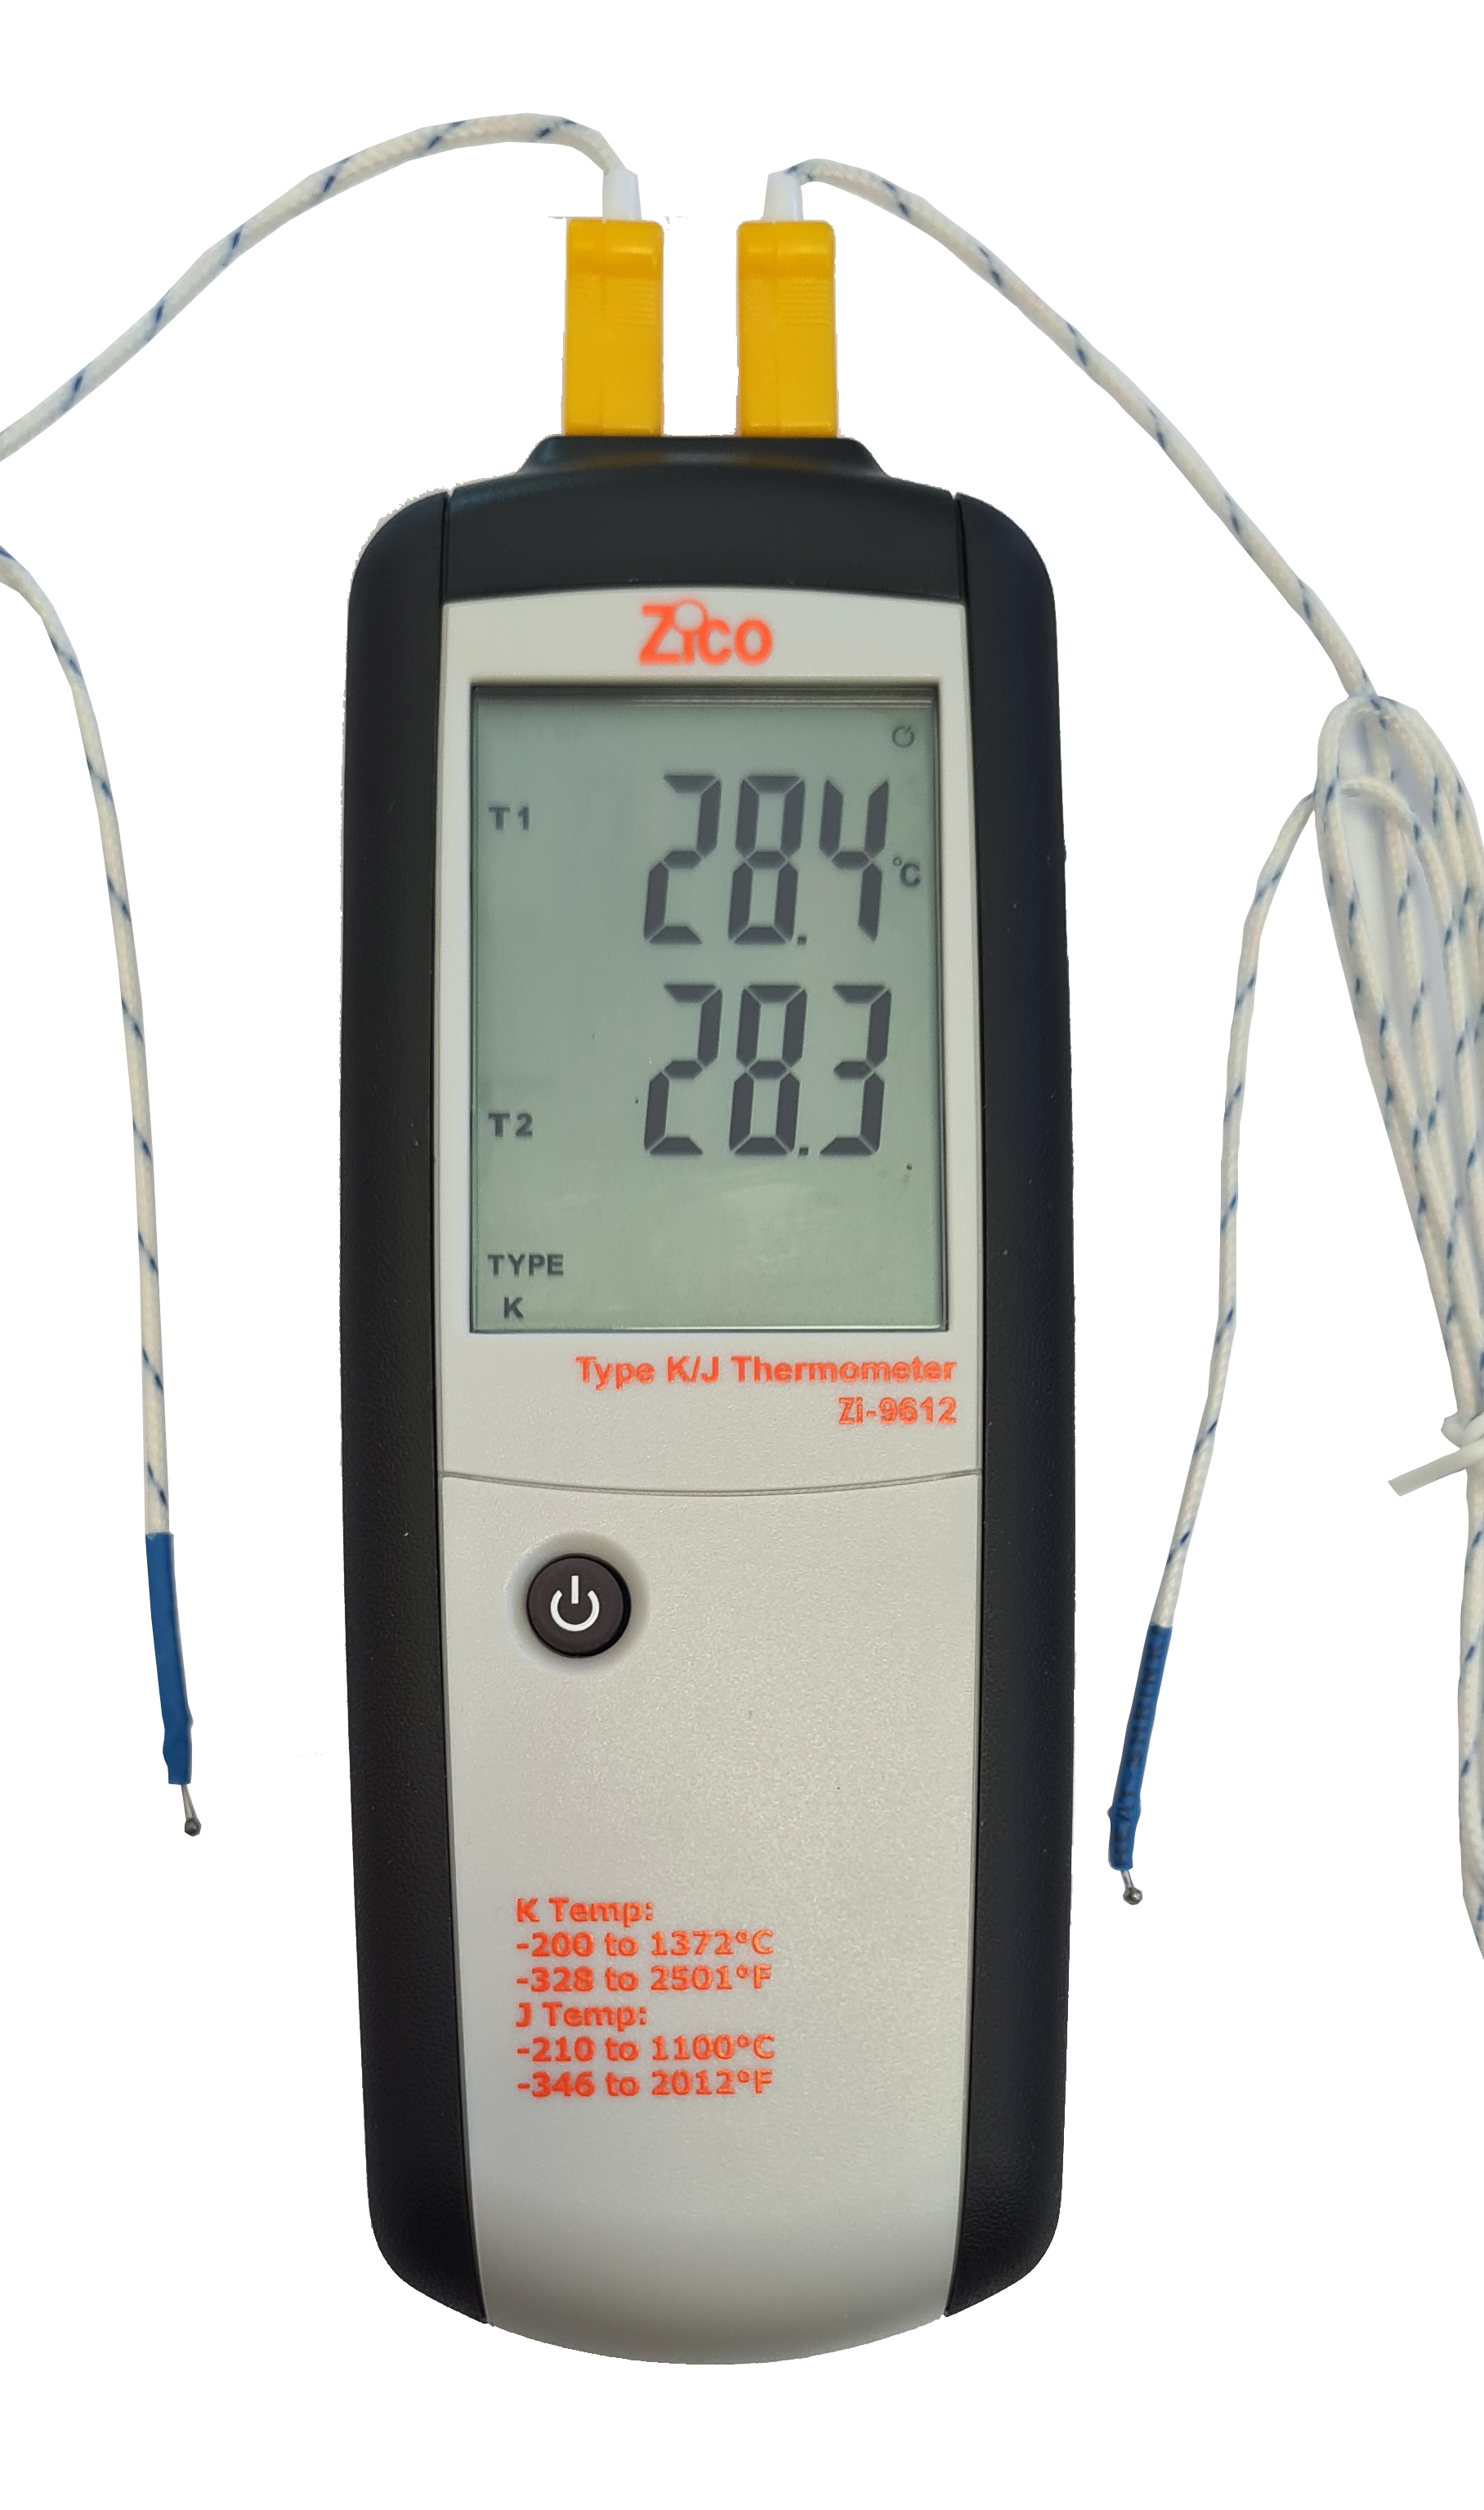 ZI-9612 Thermometer with dual K-Tpye Input